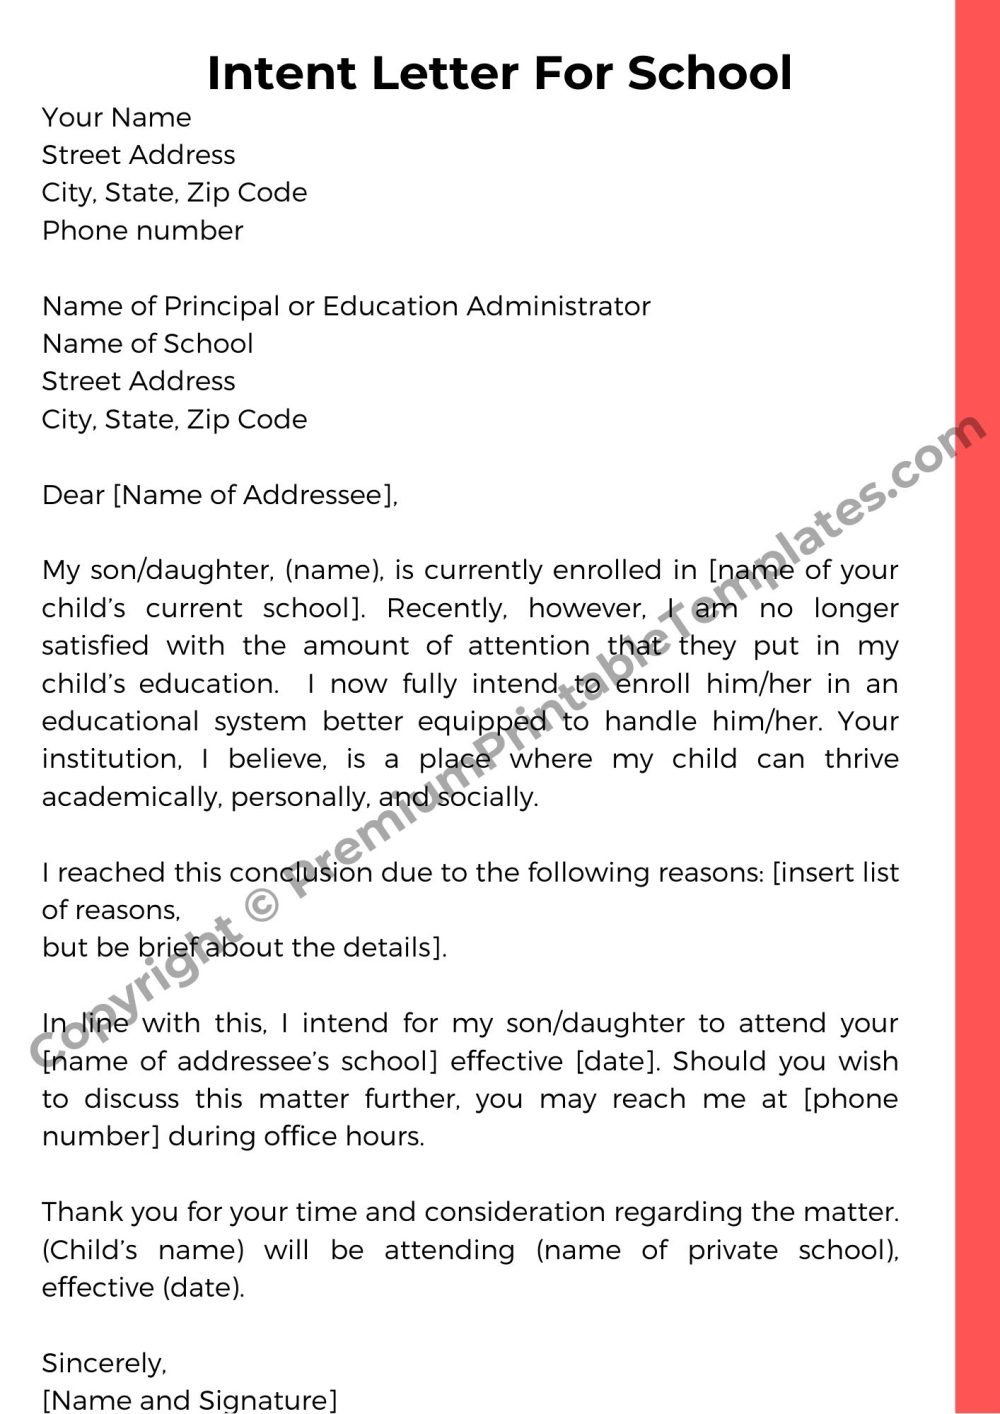 Intent Letter For School Template